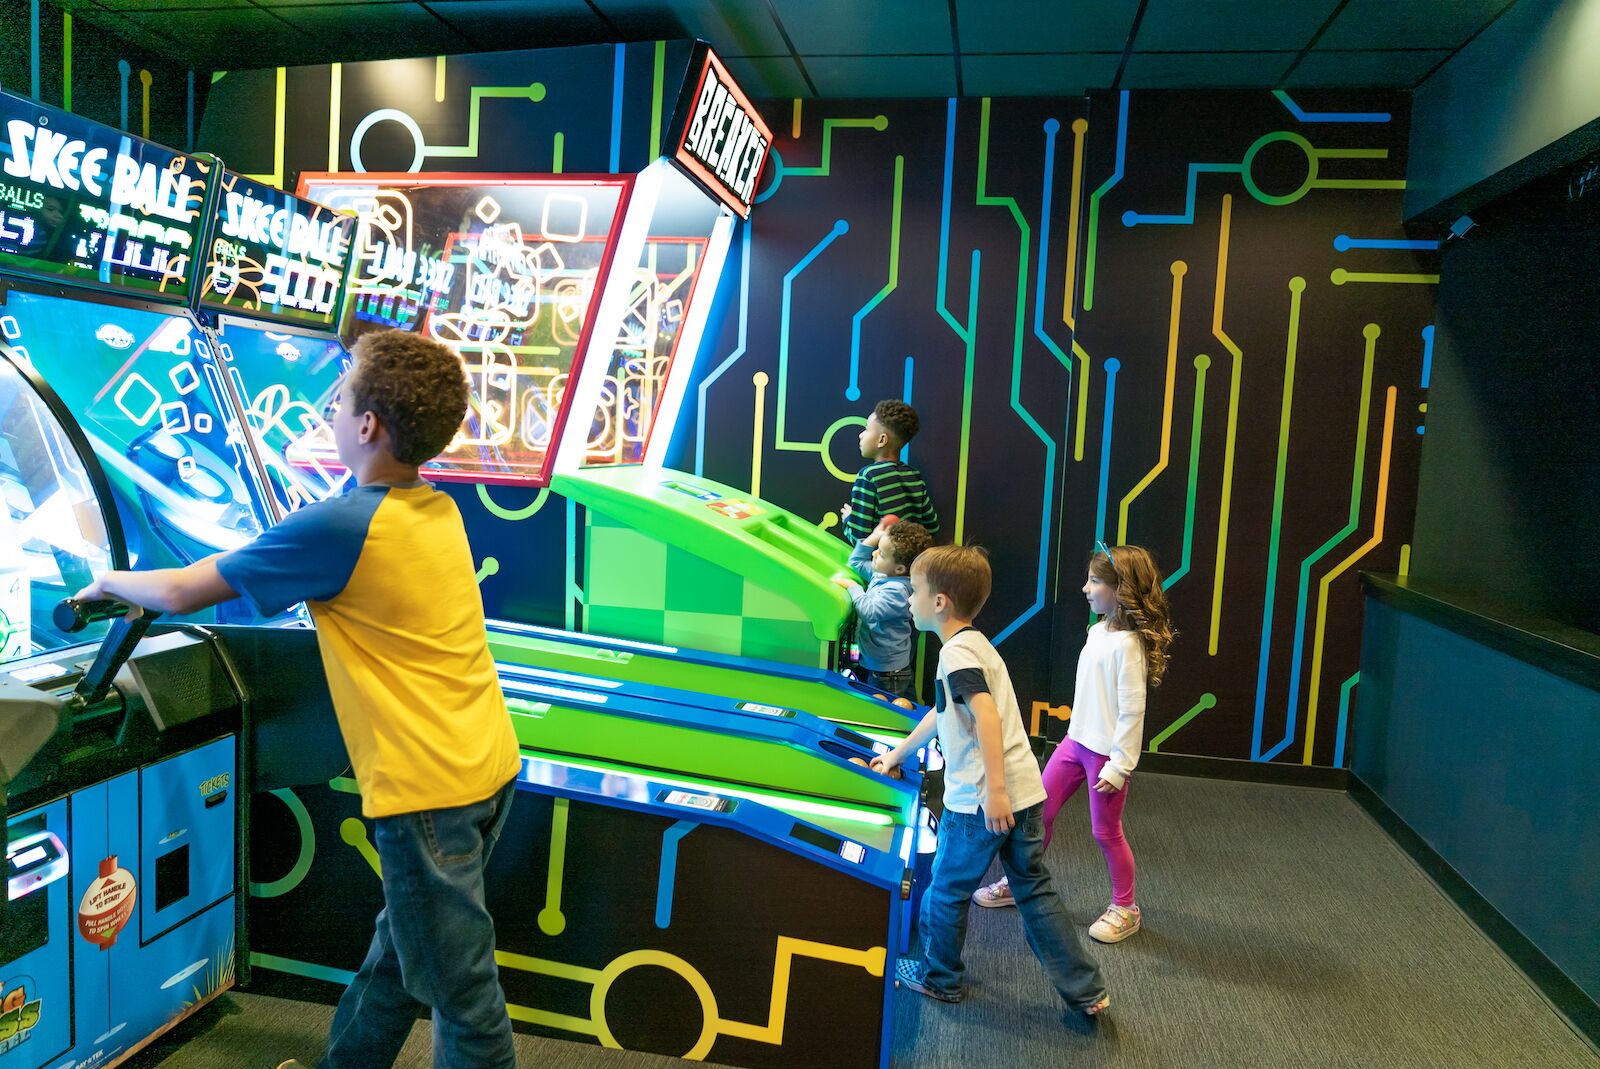 Arcade games at the Cartoon Network Hotel in Lancaster, PA